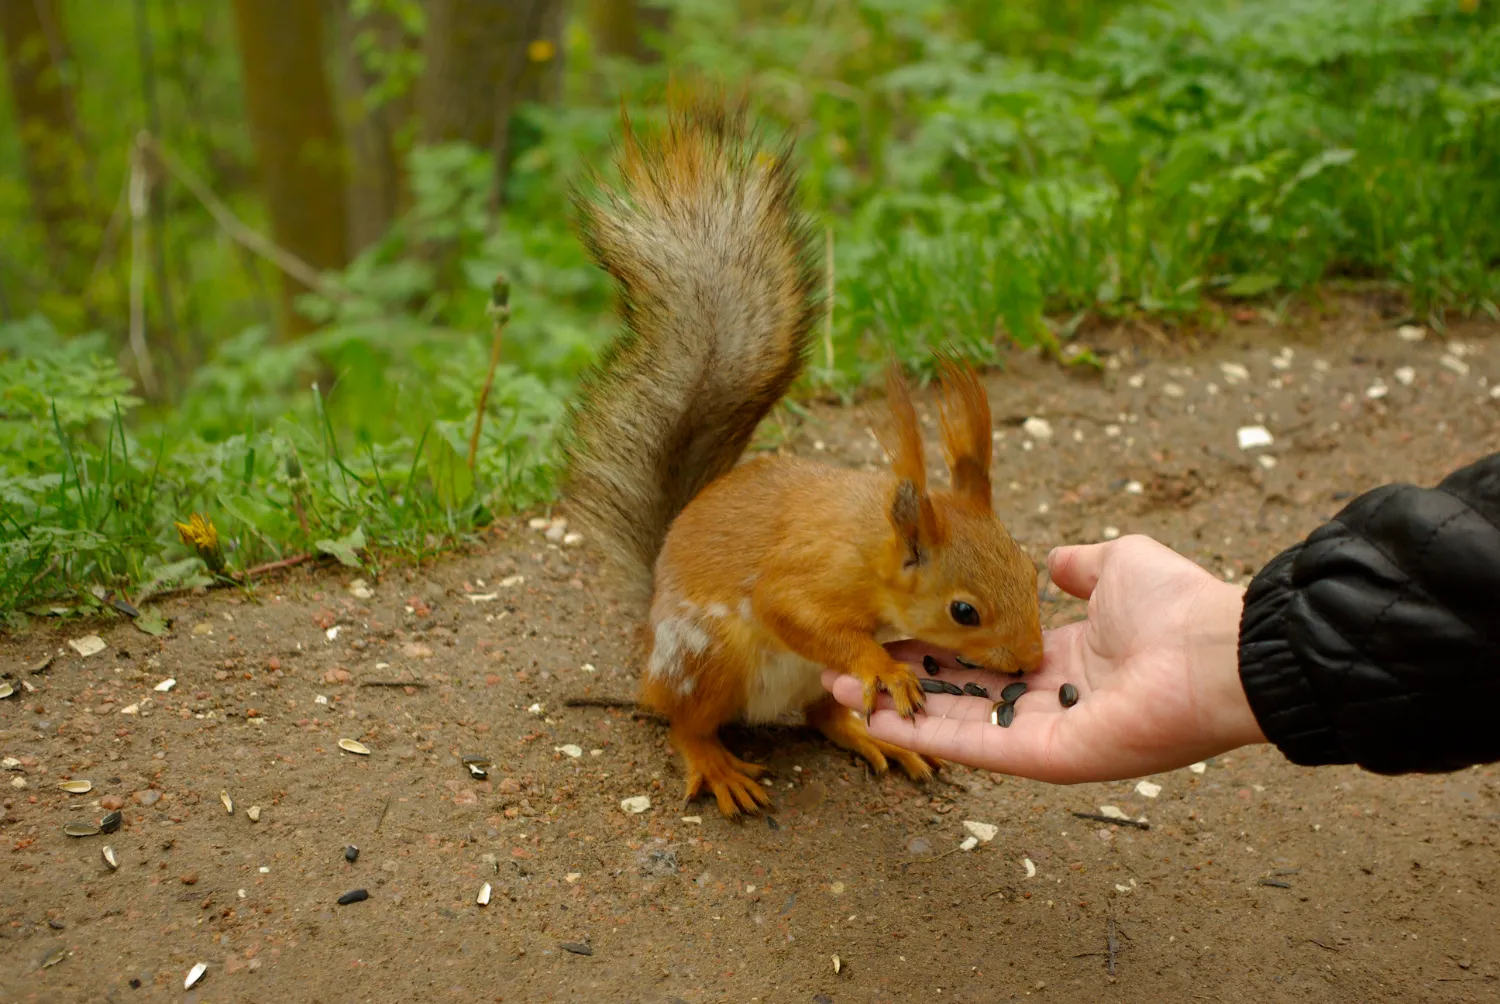 Squirrel eats sunflower seeds from a hand